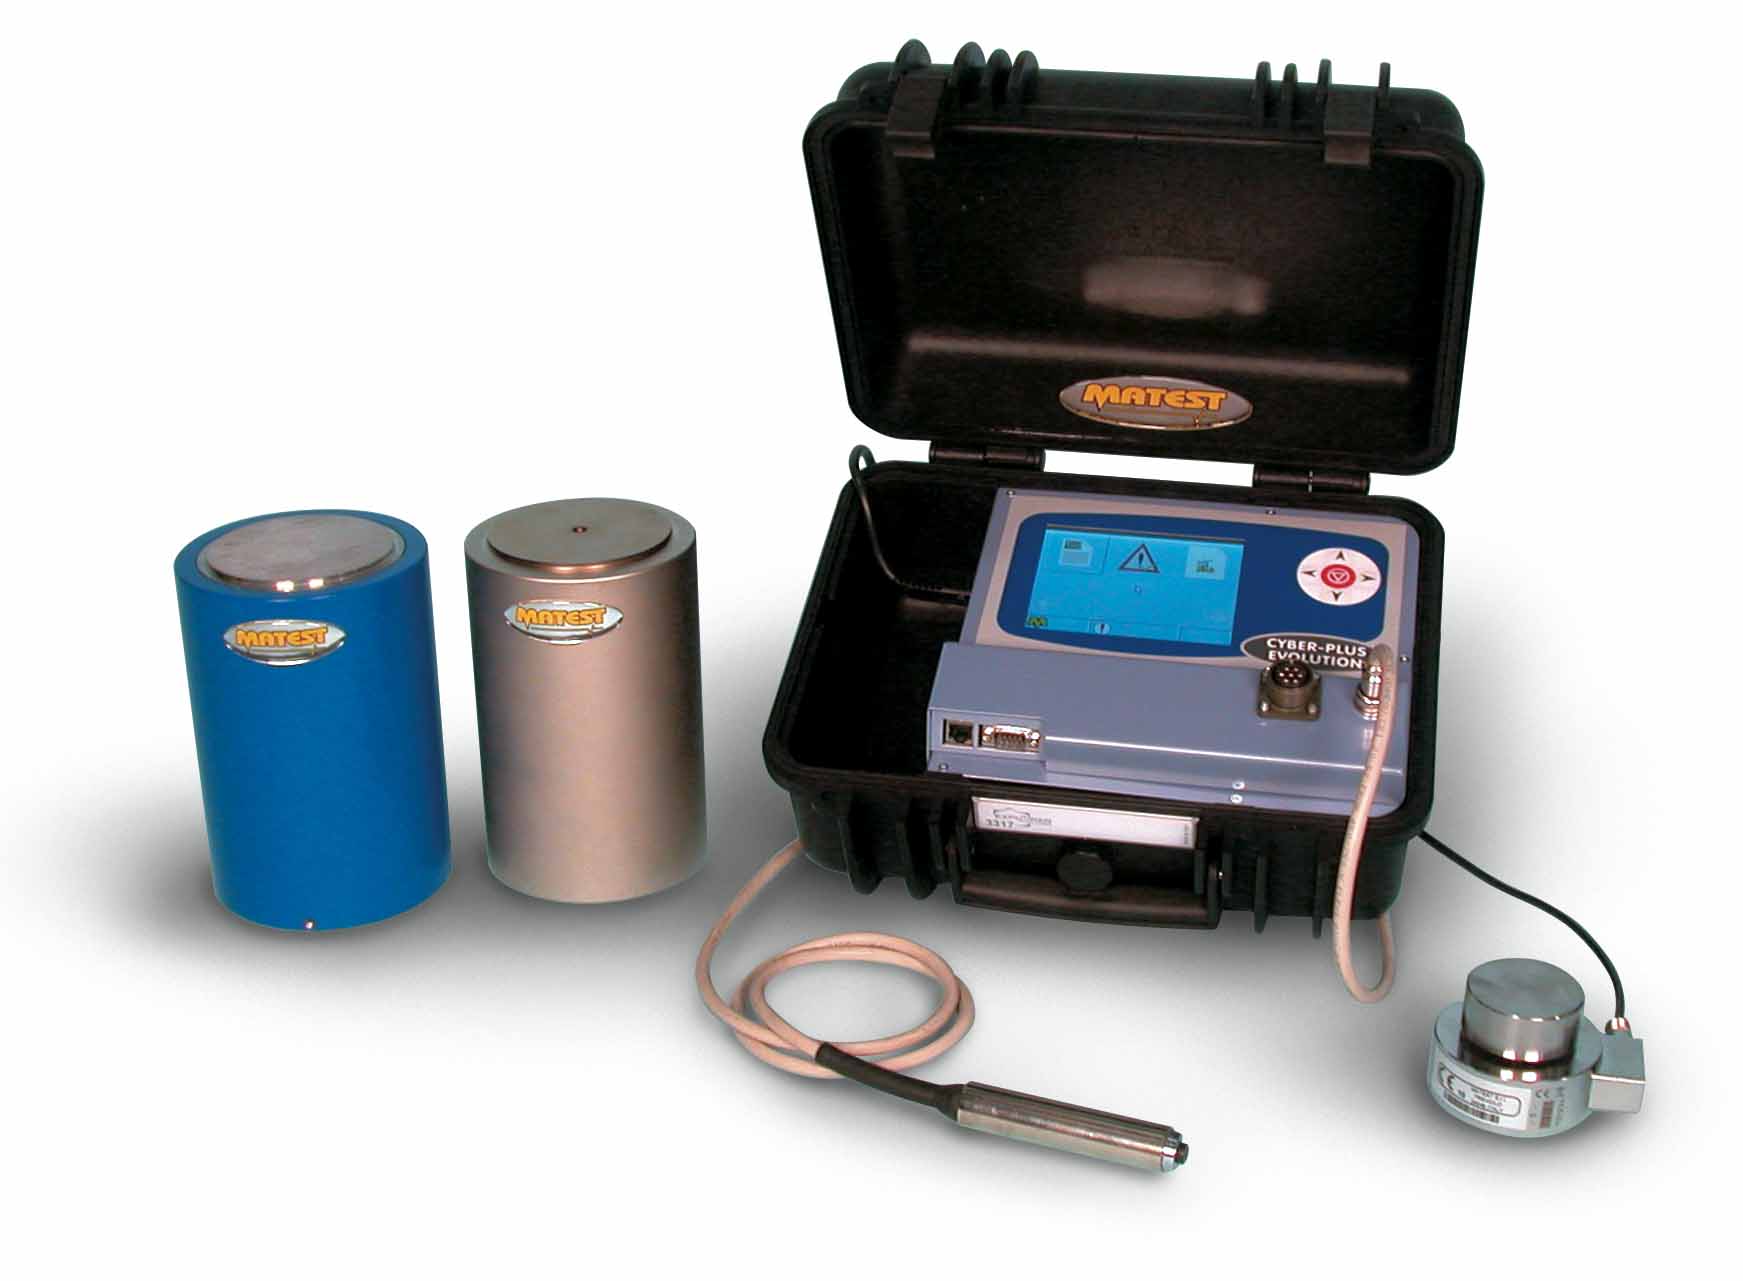 UNIVERSAL DIGITAL TESTER WITH MICROPROCESSOR FOR LOAD CELLS